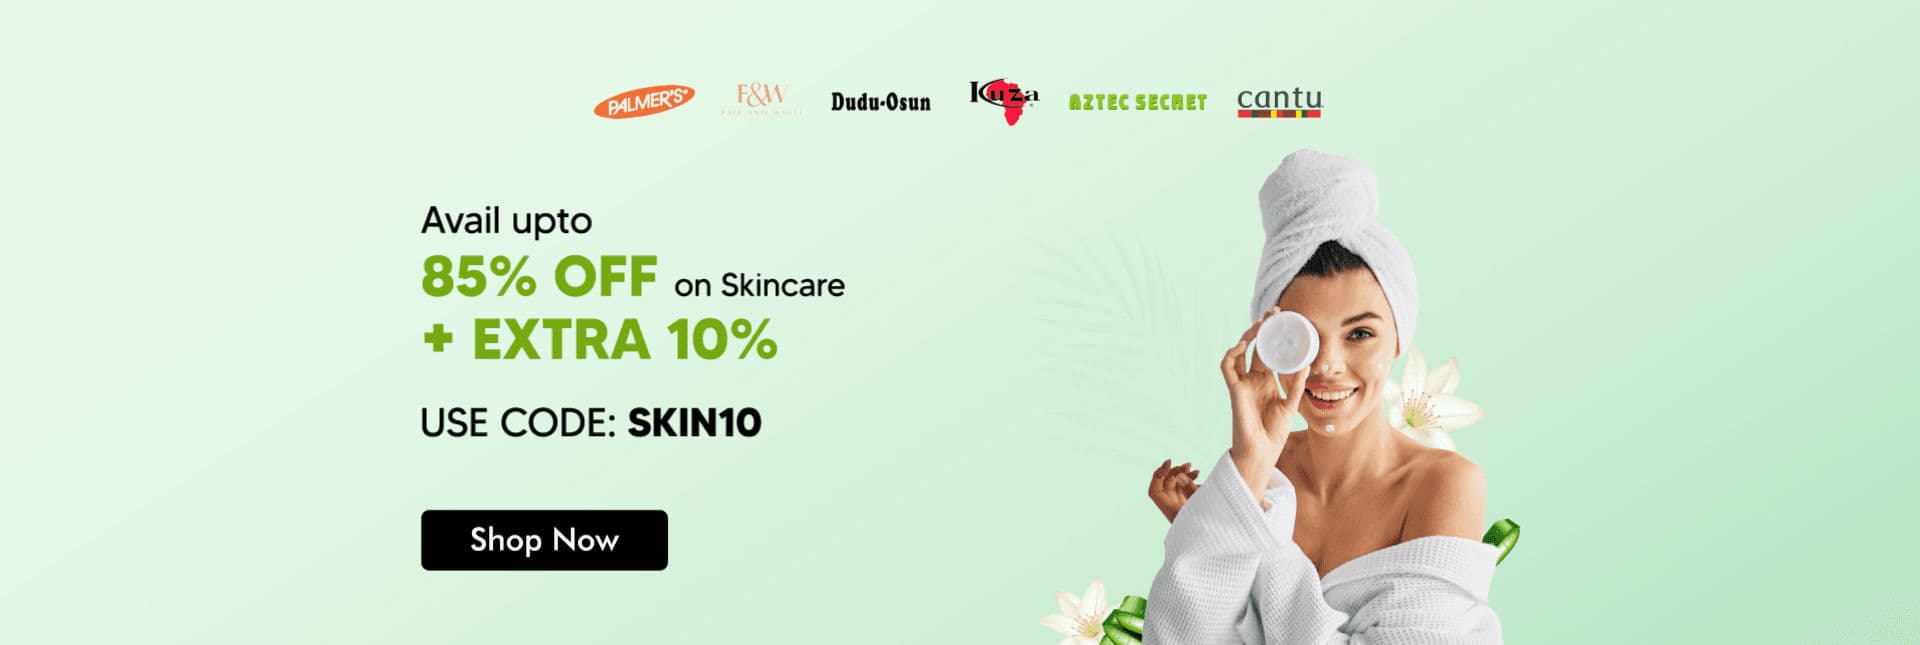 Avail upto 85% off on Skincare + EXTRA 10% using below code 